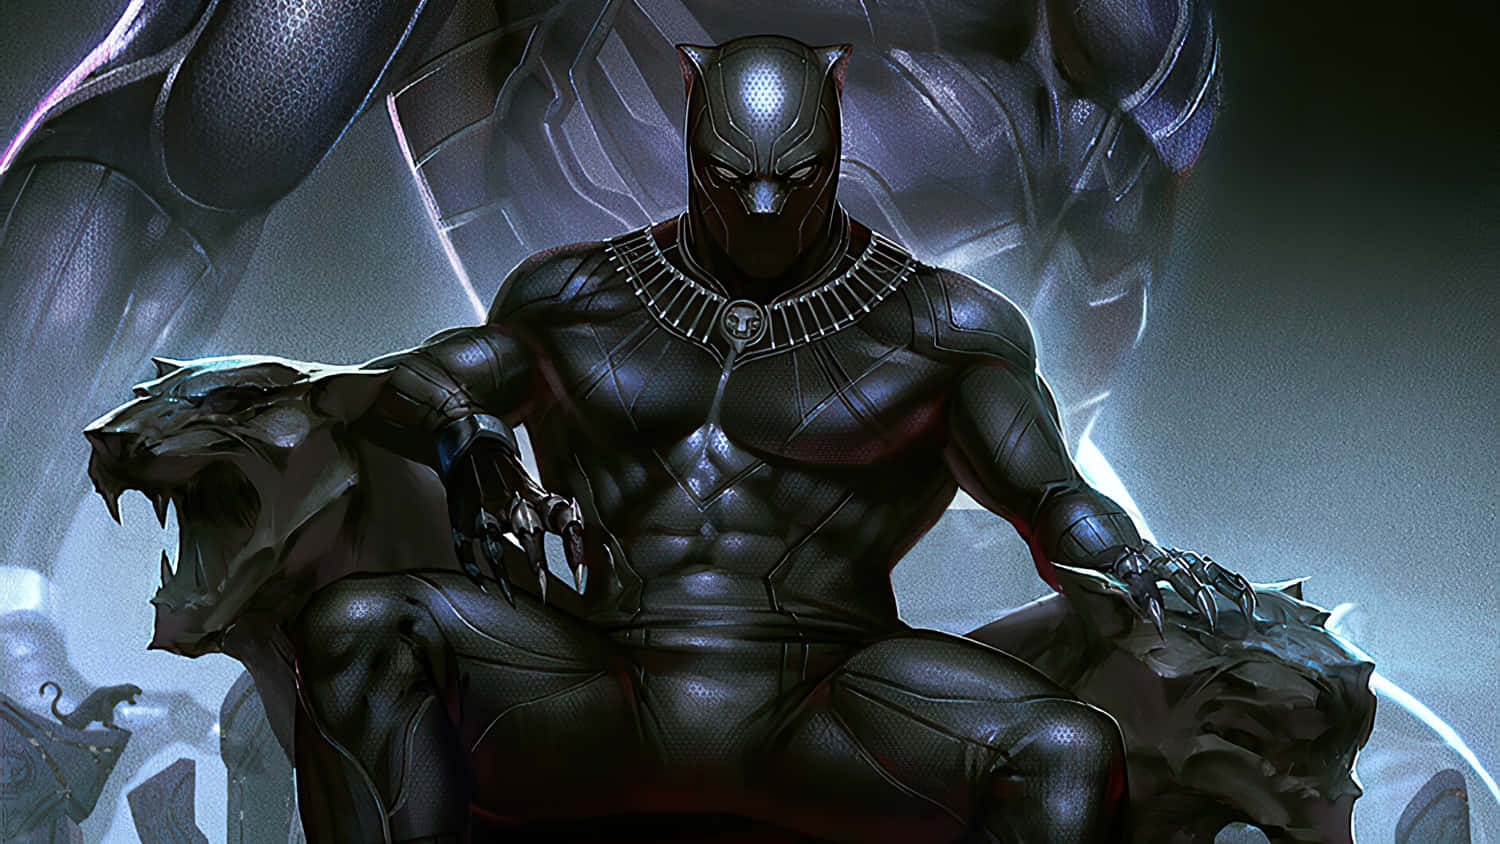 T'Challa, the Black Panther